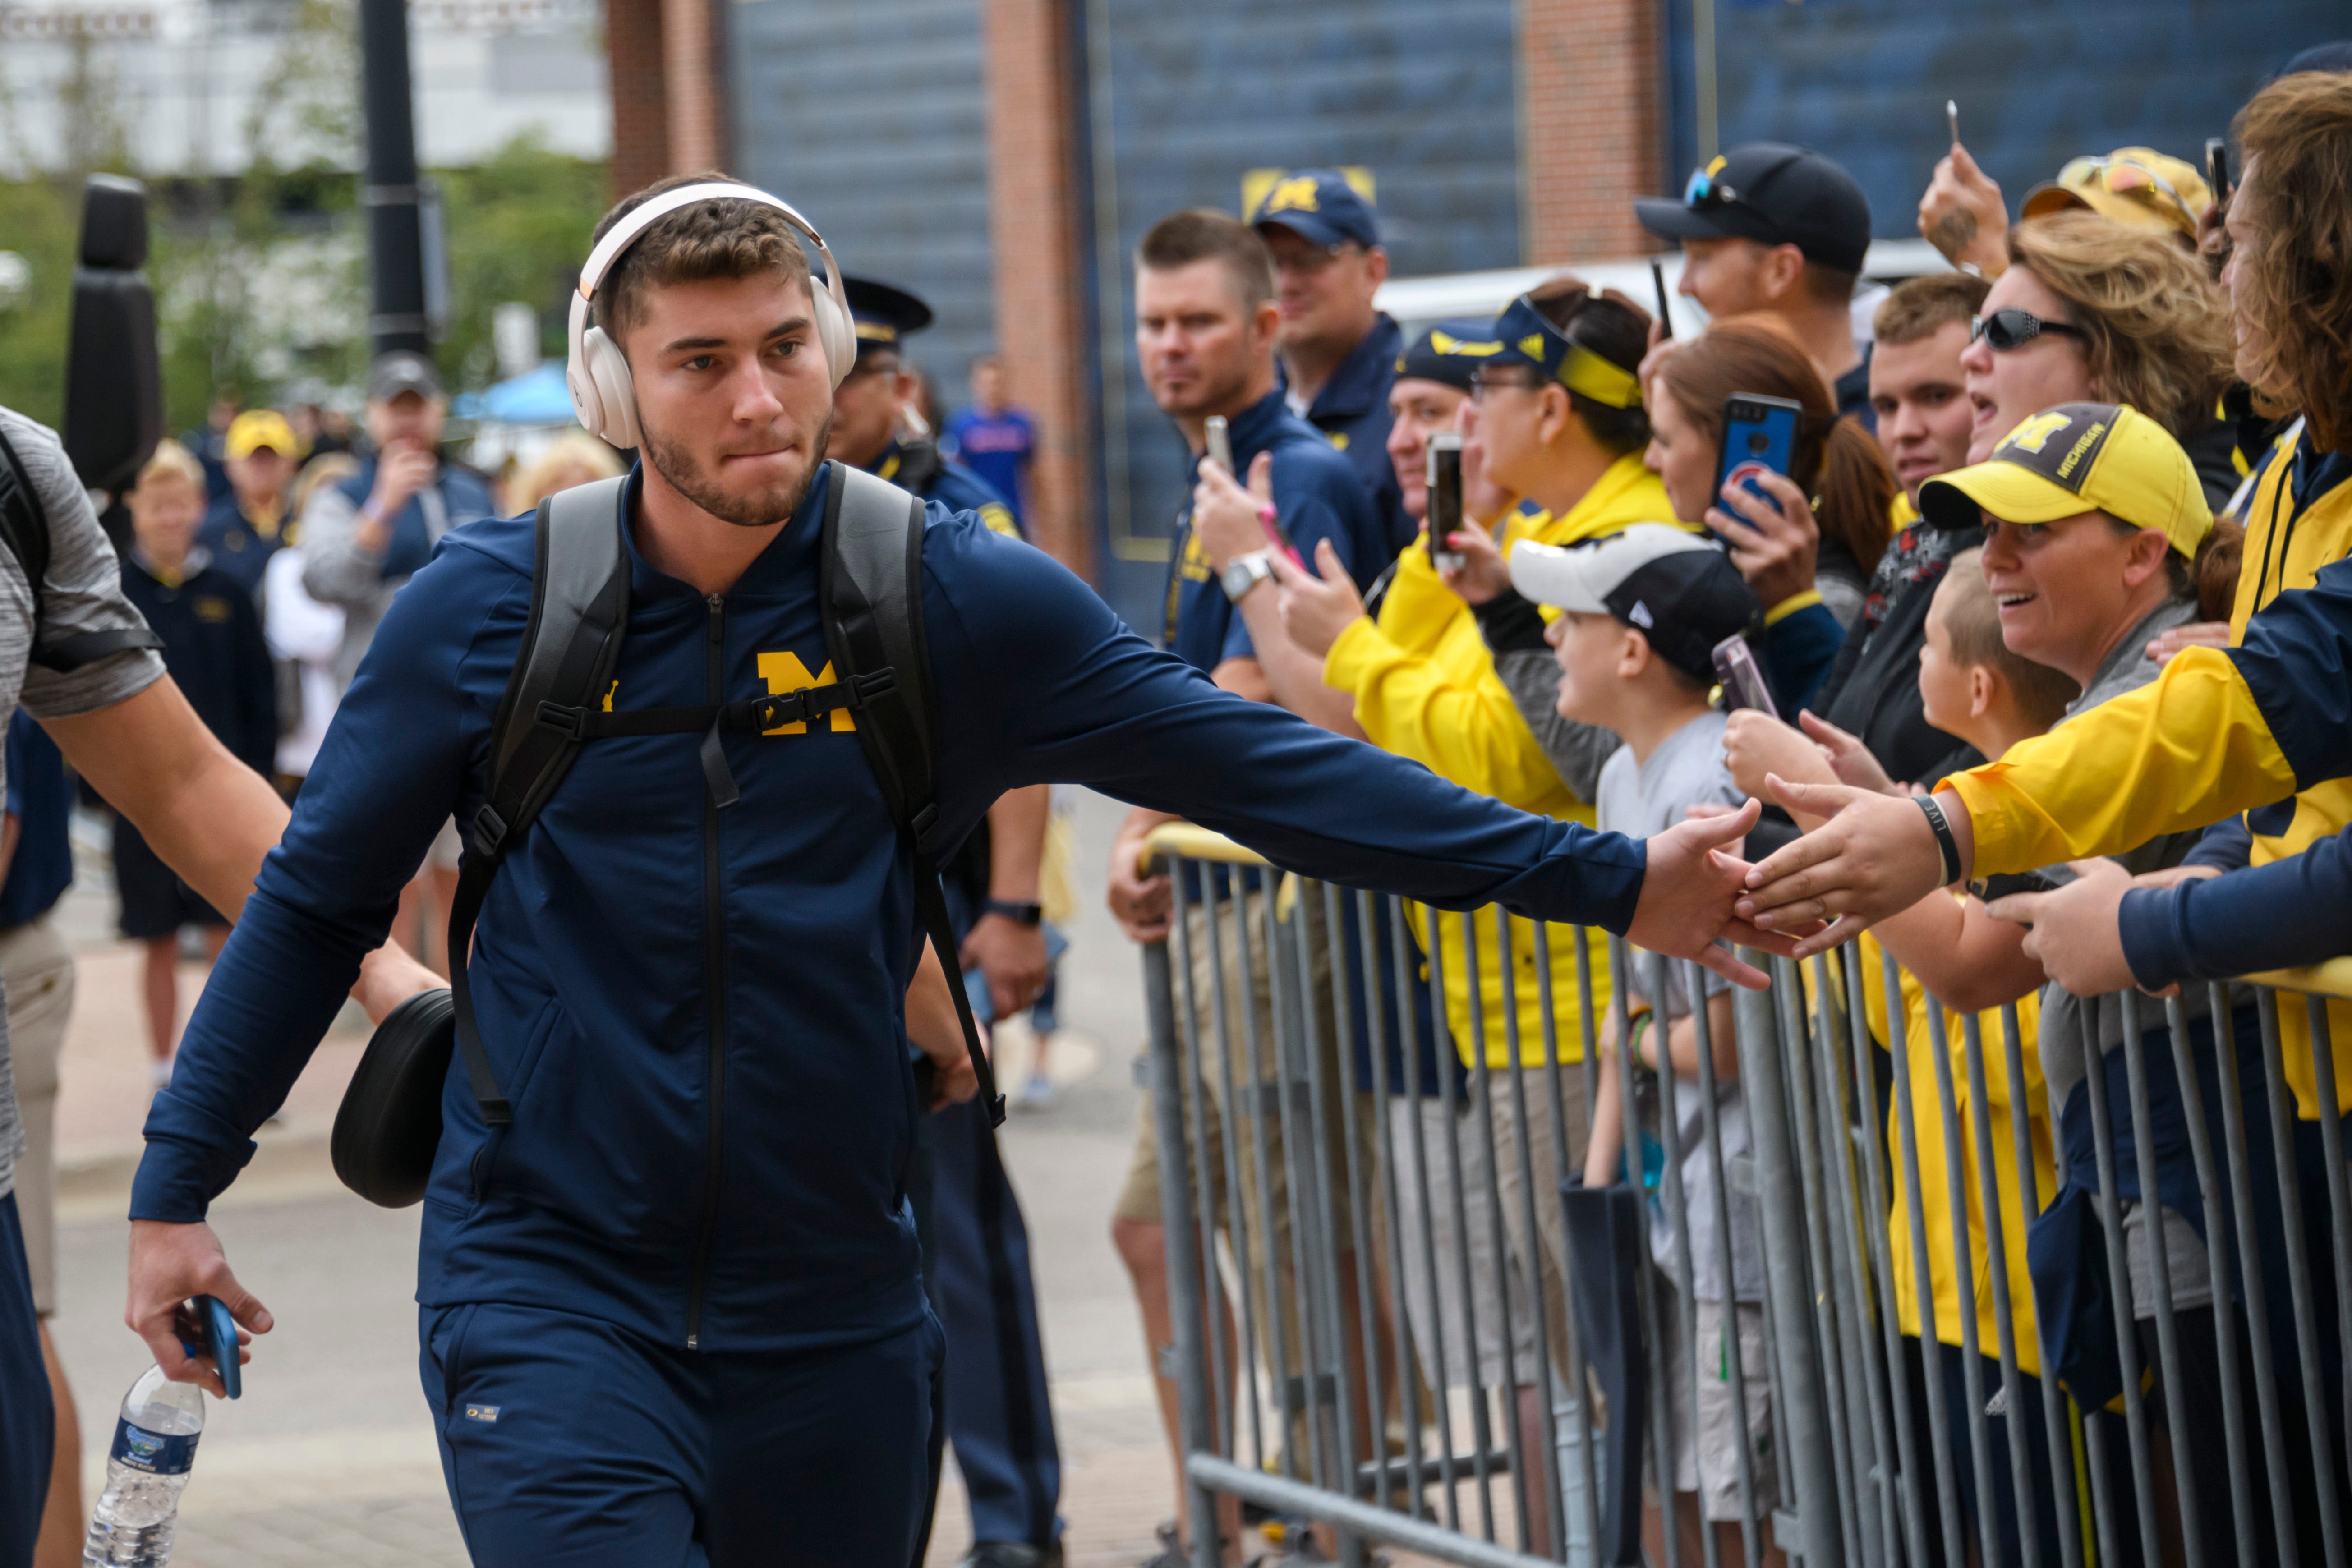 Michigan quarterback Shea Patterson greets fans as the team arrives at Michigan Stadium for the game against Western Michigan.